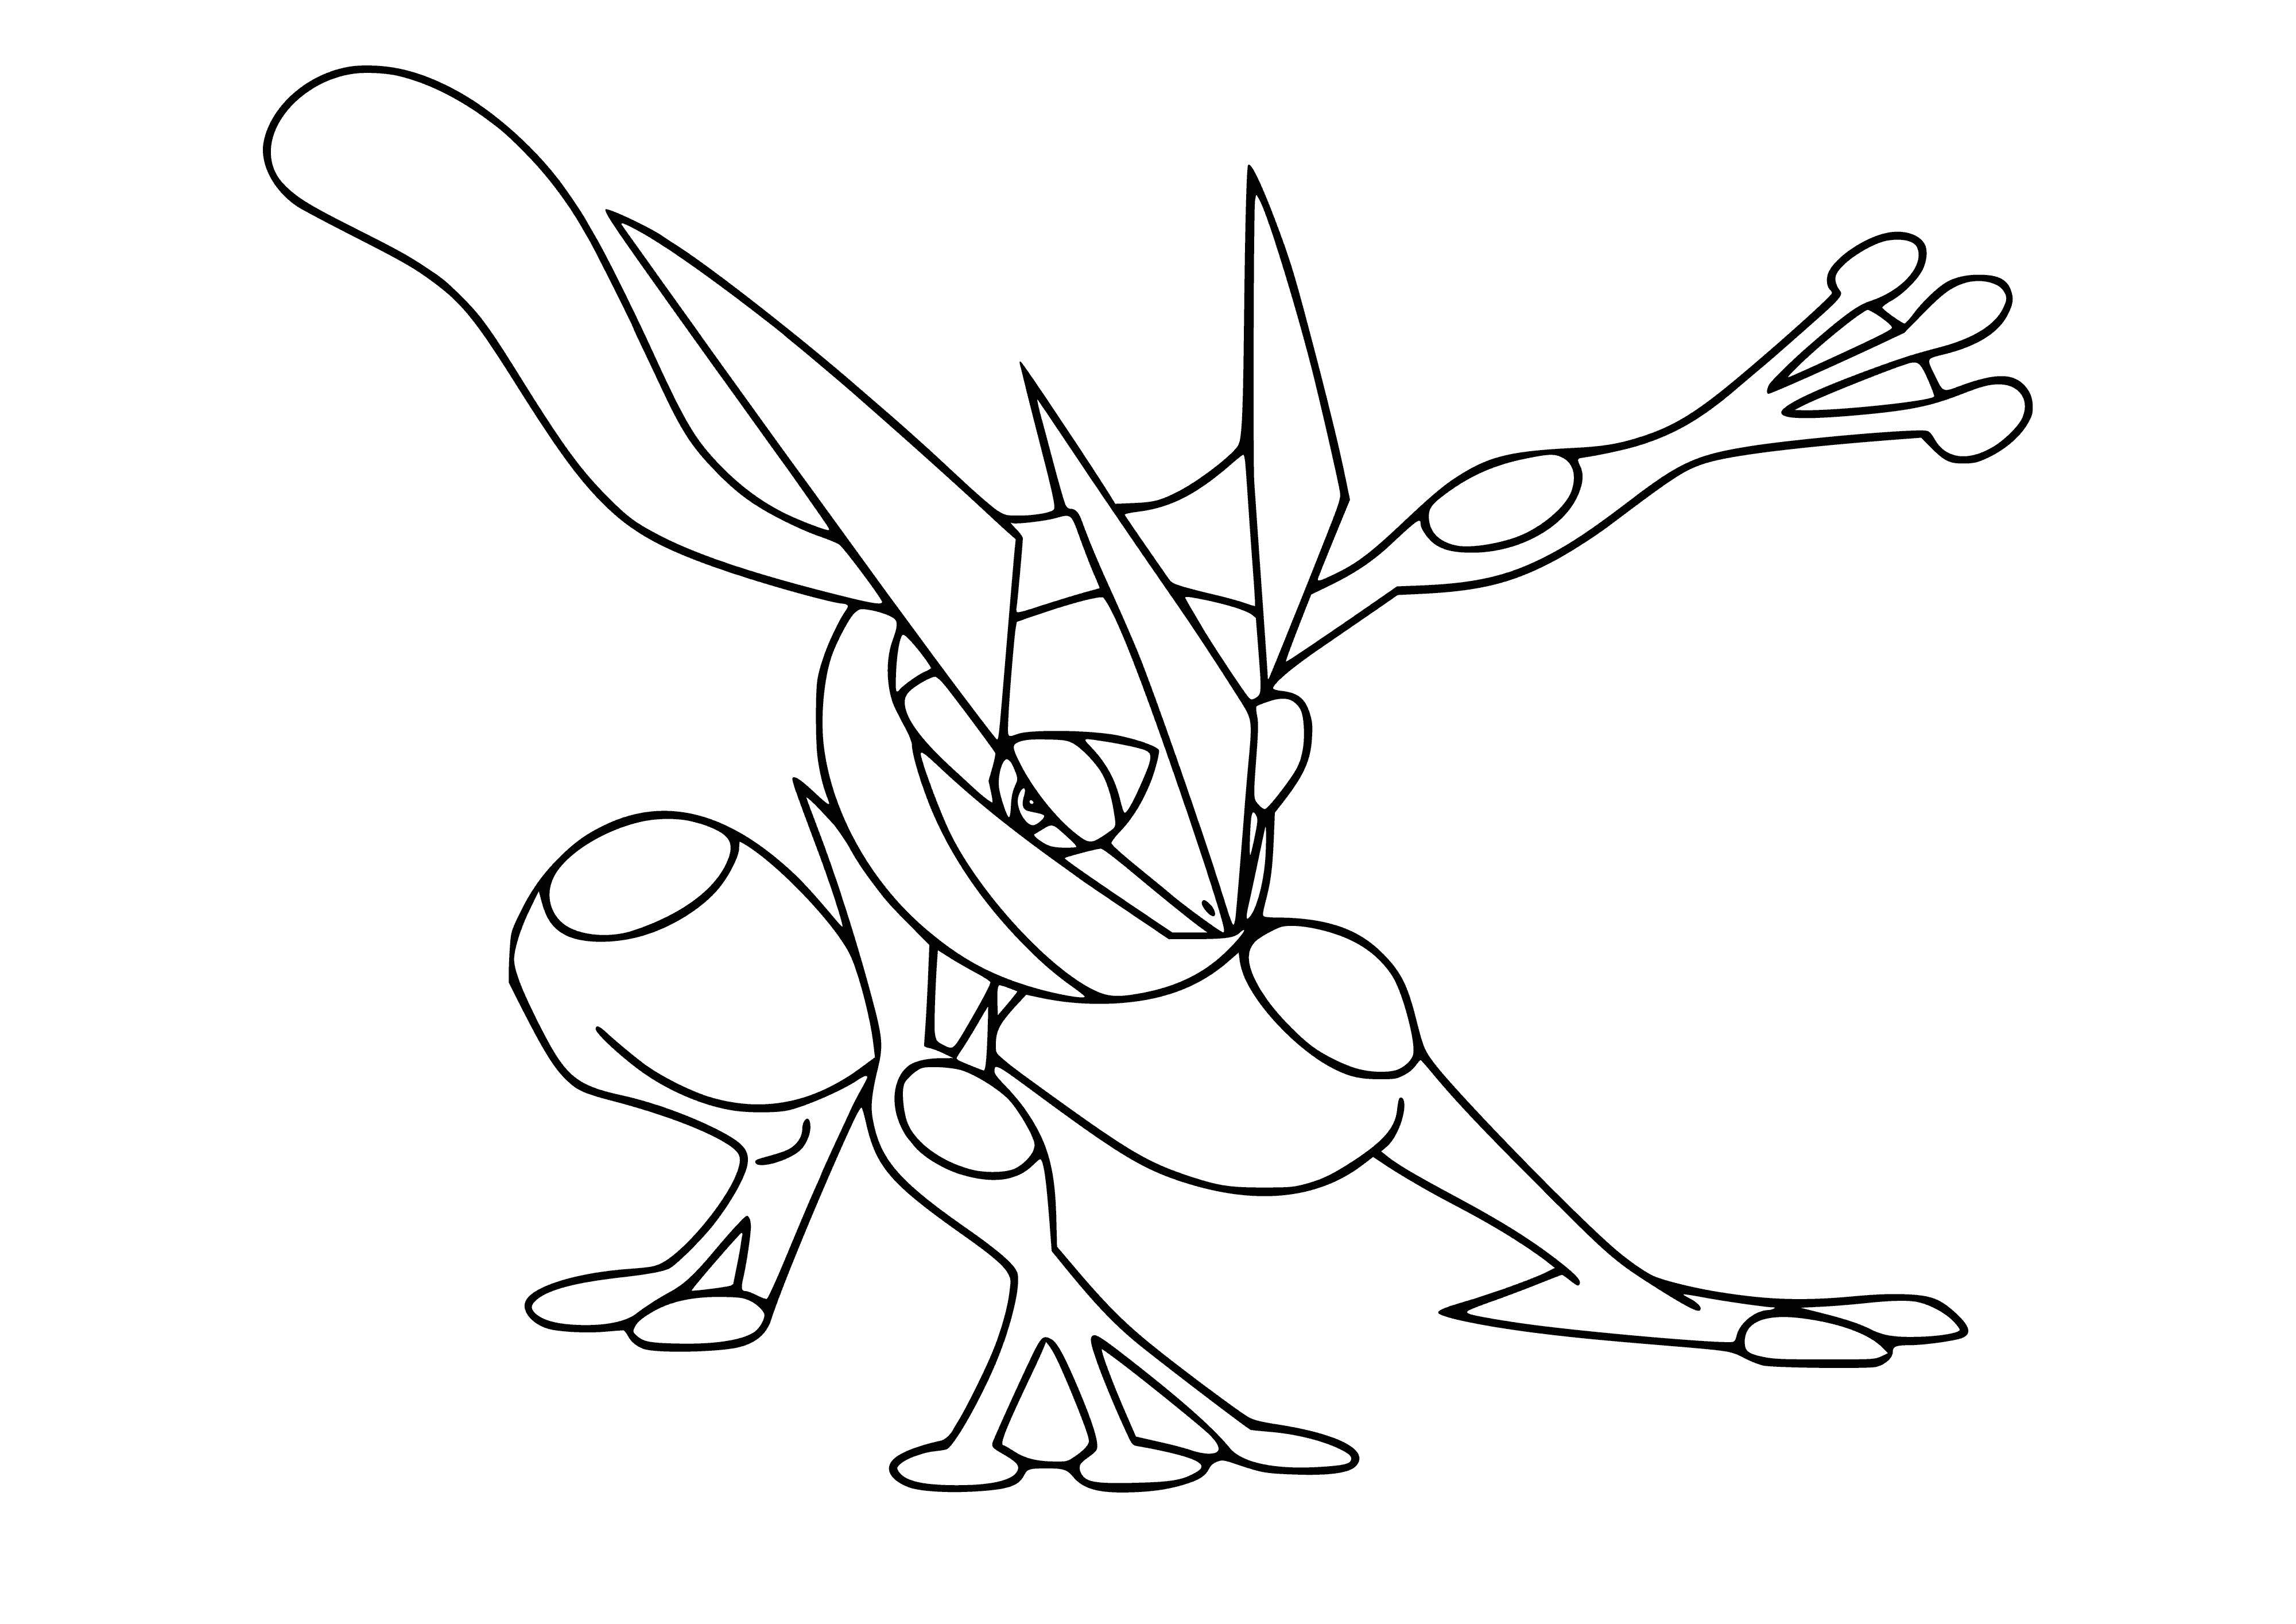 coloring page: Greninja is a fast and agile water/dark type Pokemon that can jump high, run fast and shoot water like a jet. It can also spin to create whirlpools.